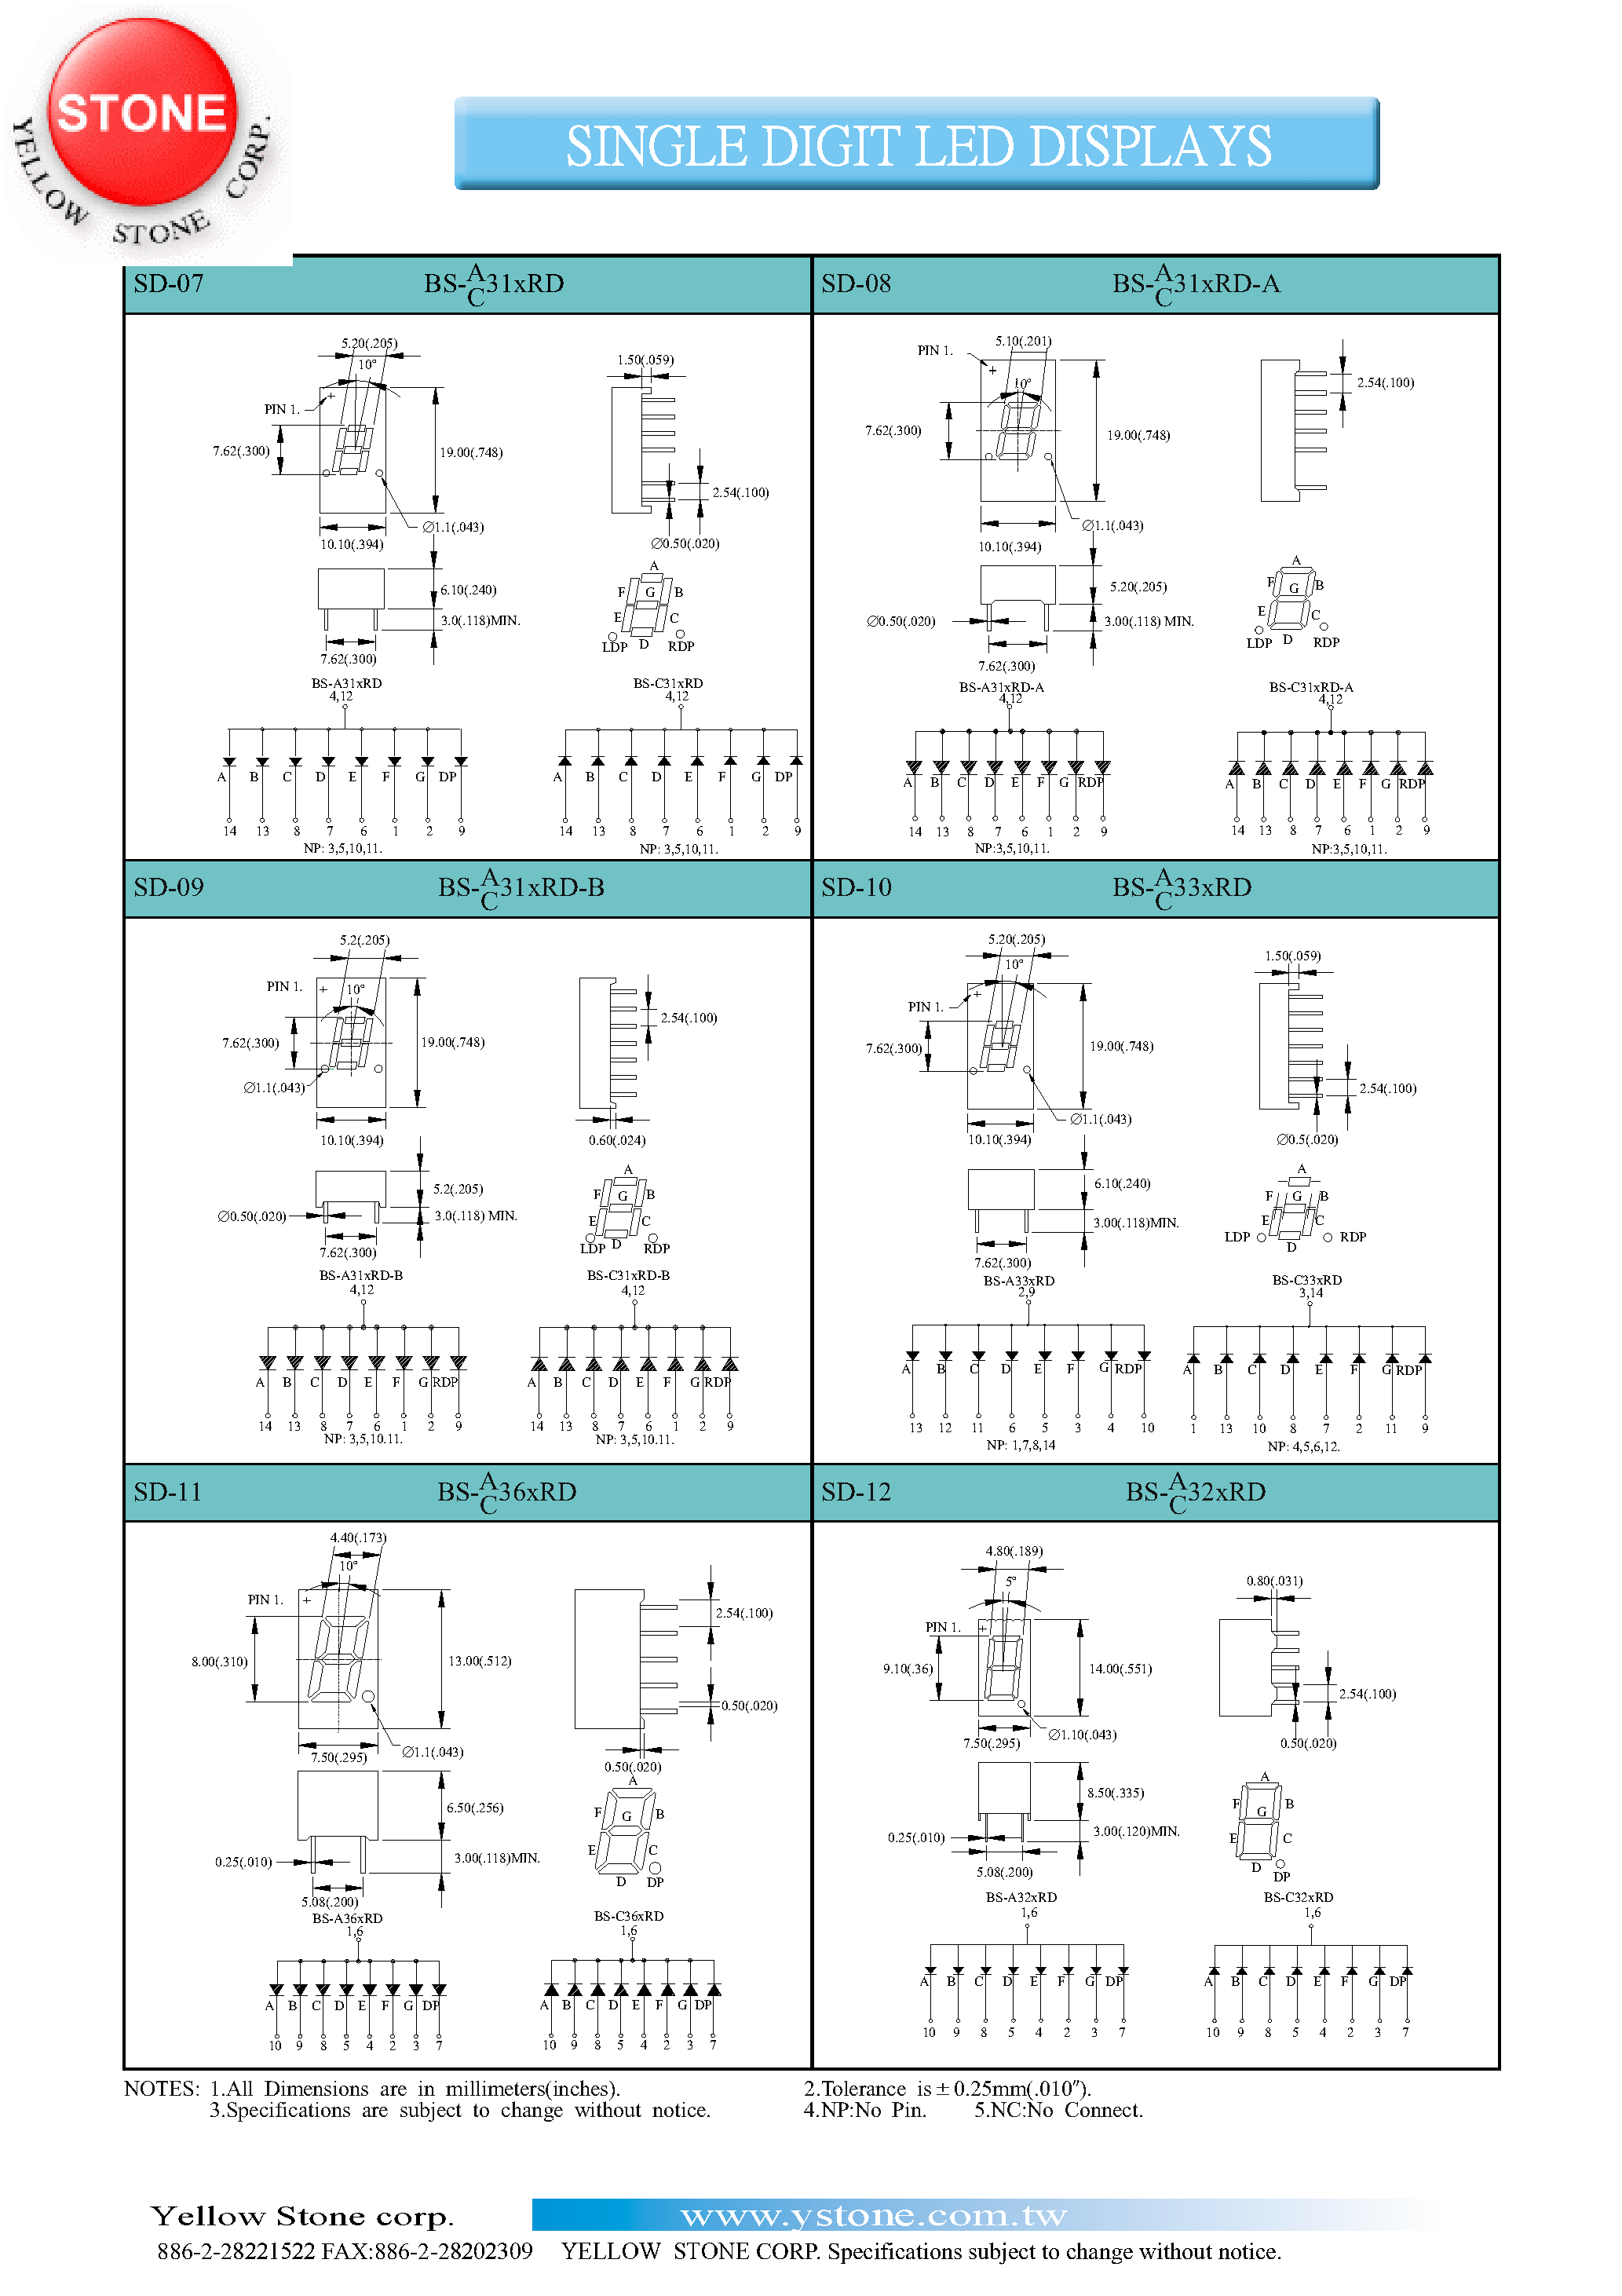 Datasheet BS-A315RE-B - SINGLE DIGIT LED DISPLAYS page 2